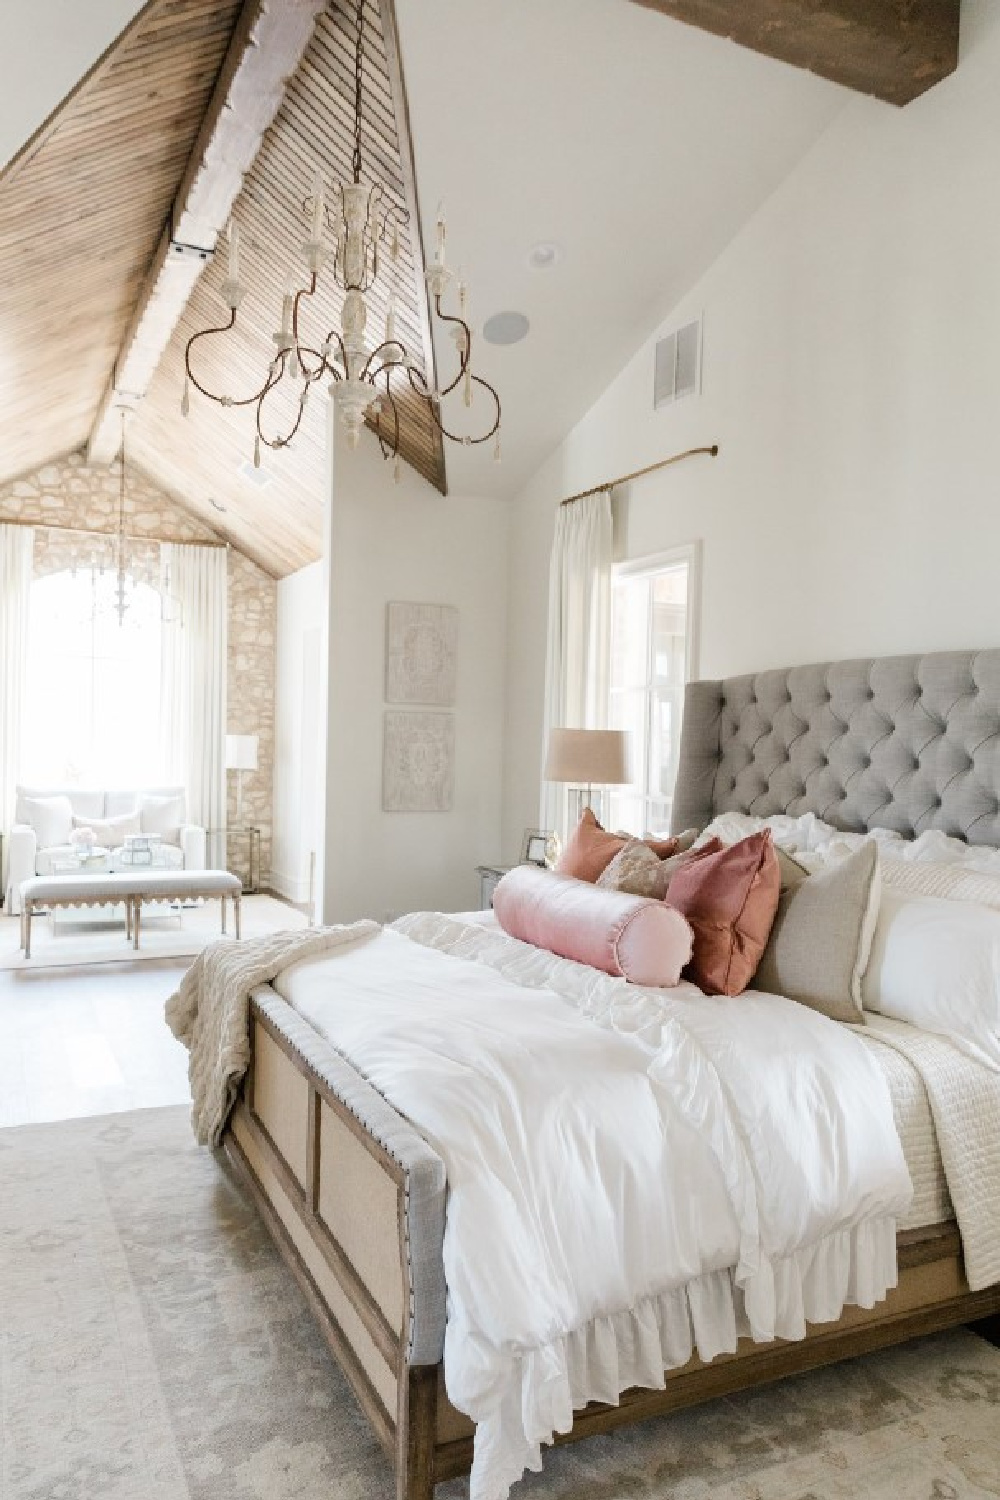 Sherwin-Williams Alabaster in a beautiful country French new build in Texas bedroom with elegant chandelier - design by Brit Jones. #swalabaster #modernfrench